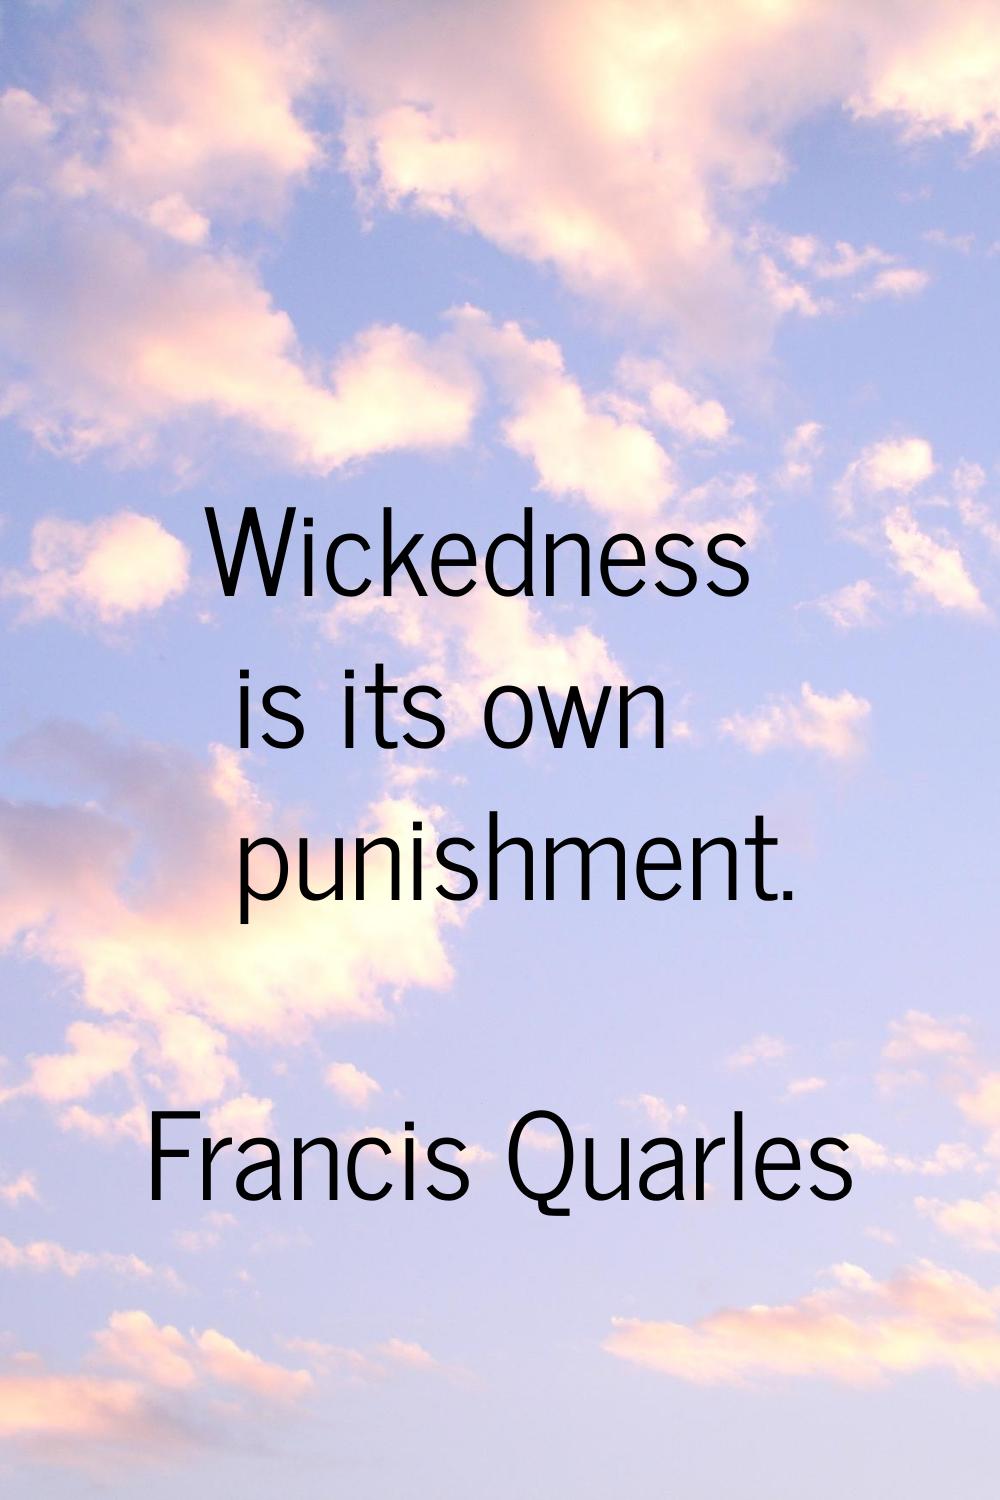 Wickedness is its own punishment.